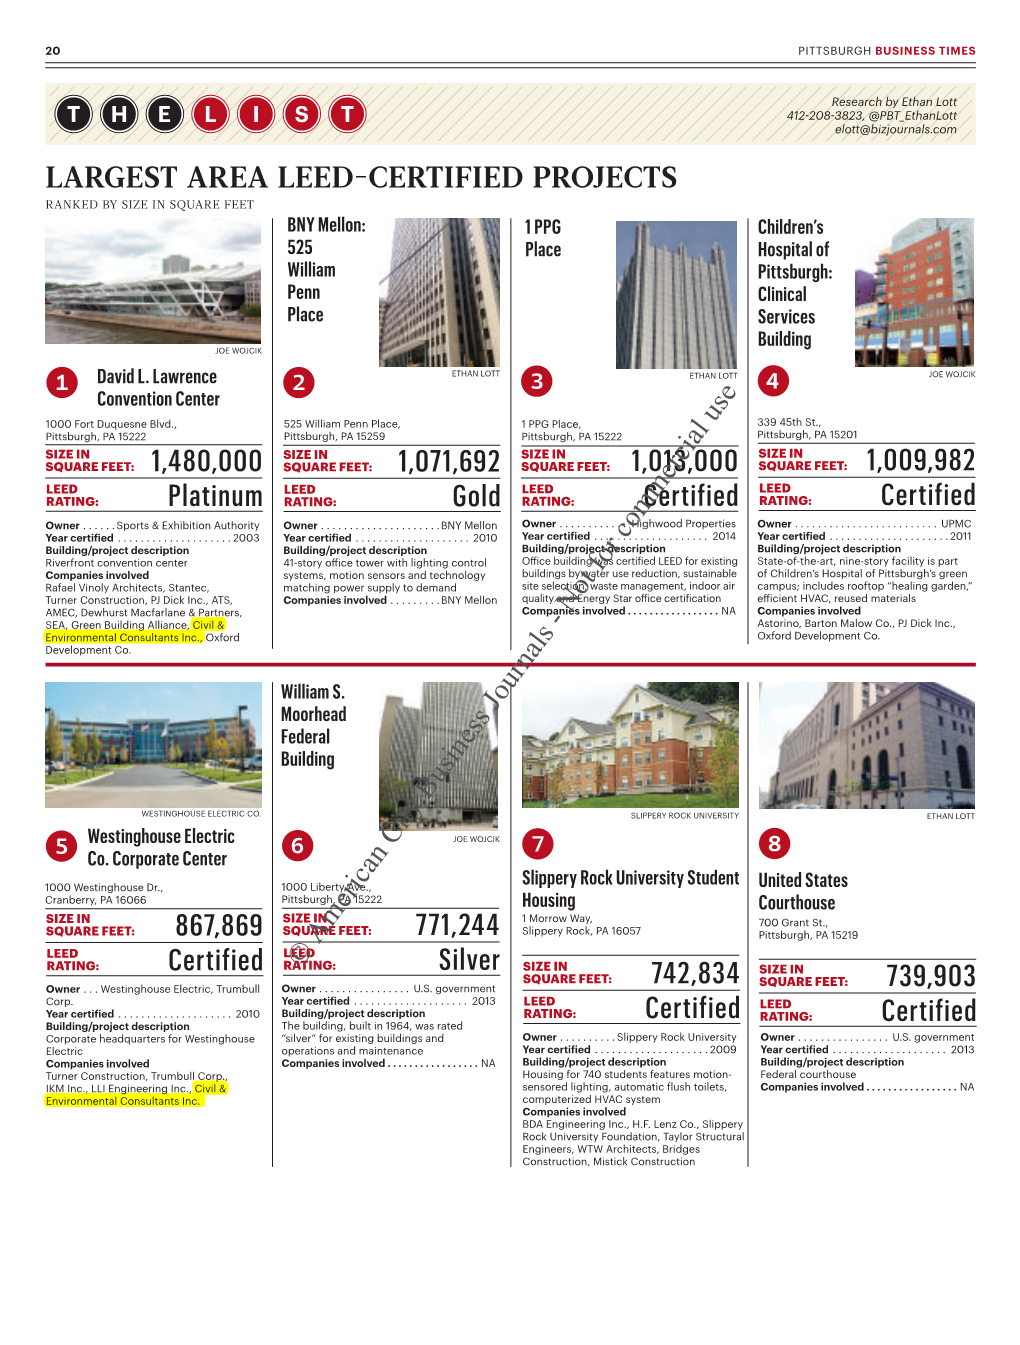 Largest Area LEED-Certified Projects